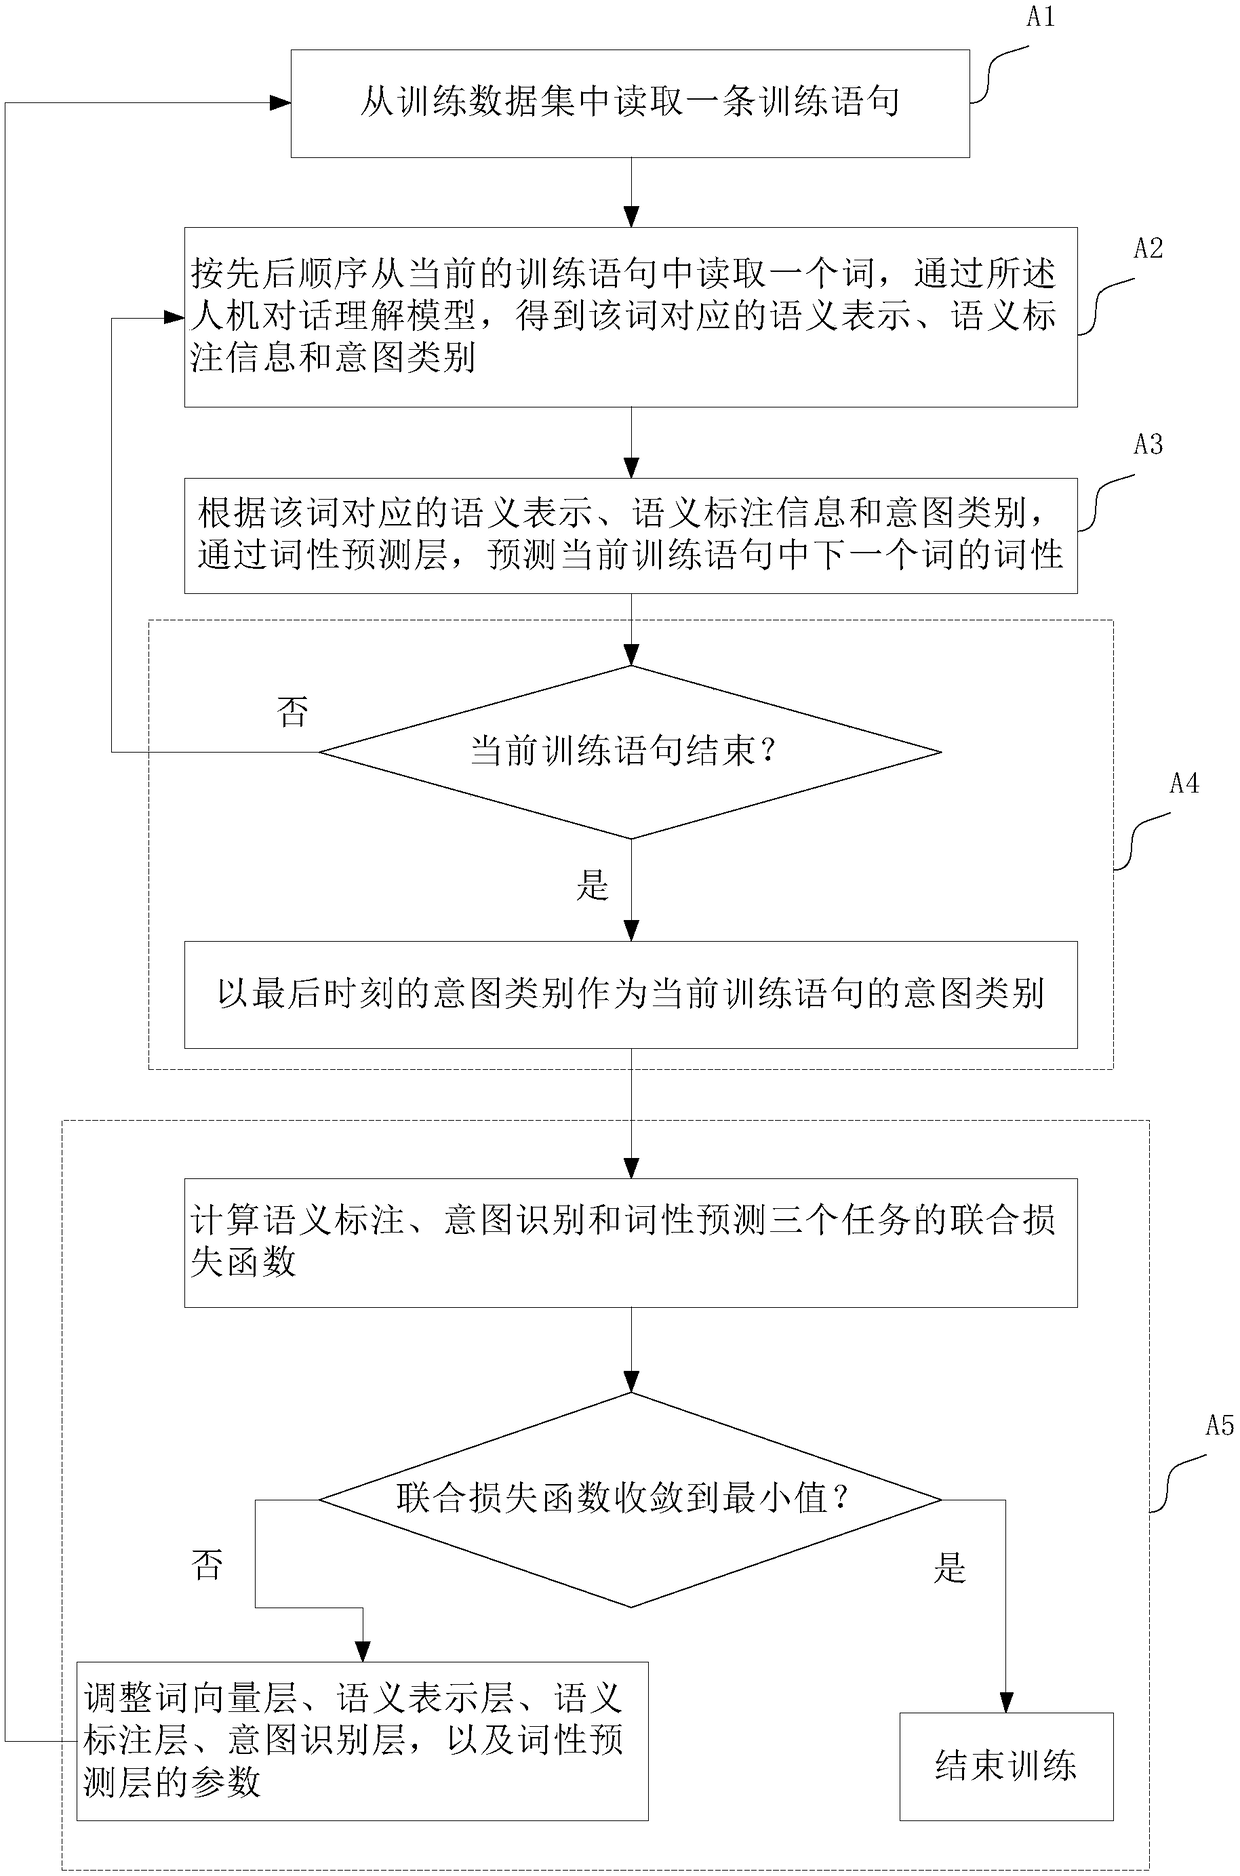 Man-machine conversation understanding method and system for specific field and relevant equipment